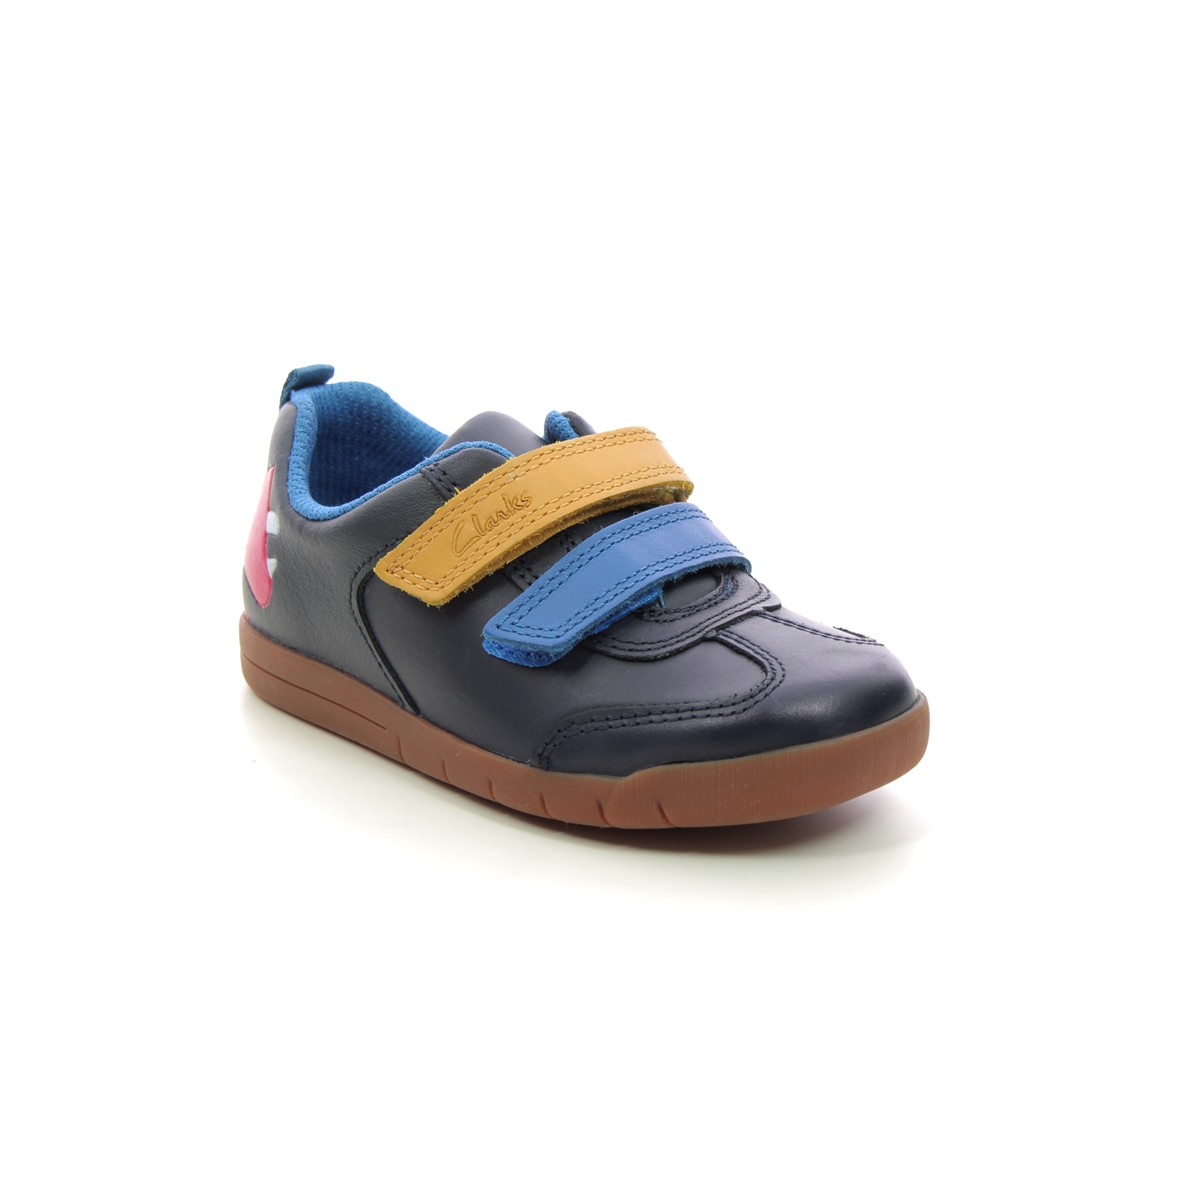 Clarks Den Play T Navy Leather Kids Boys Toddler Shoes 715906F In Size 6.5 In Plain Navy Leather F Width Fitting Regular Fit For kids